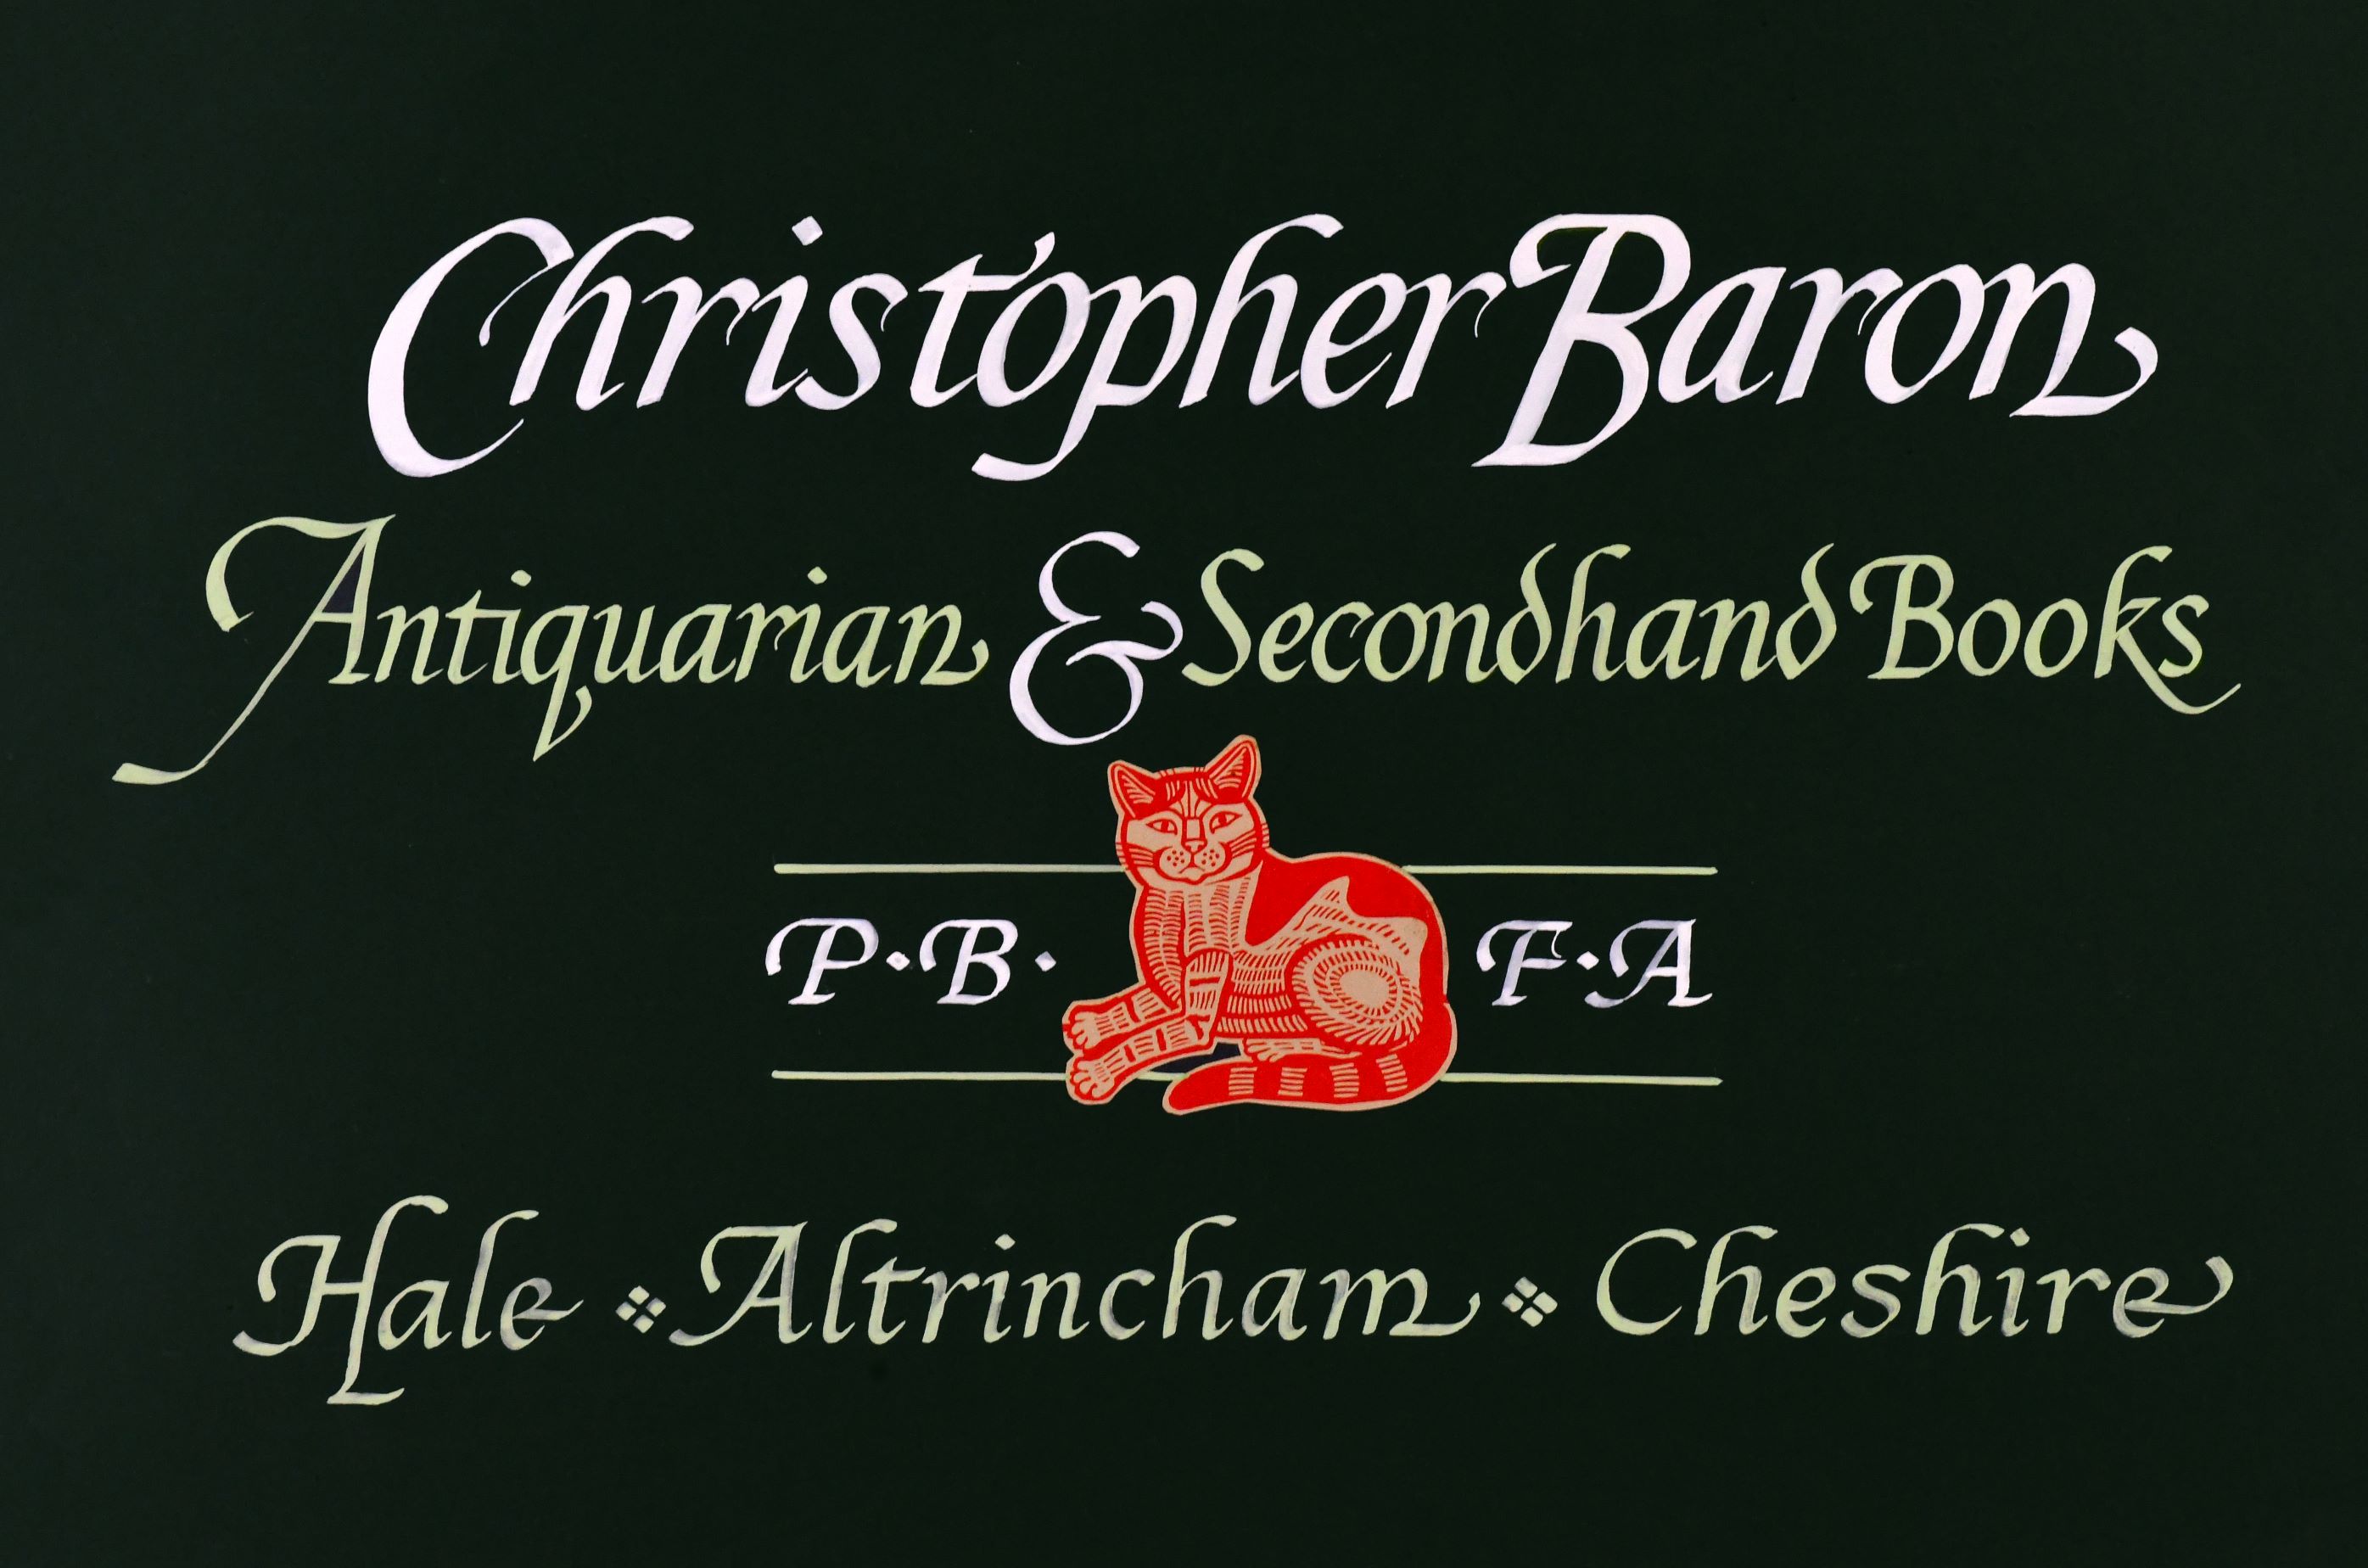 The Christopher Baron Book Collection